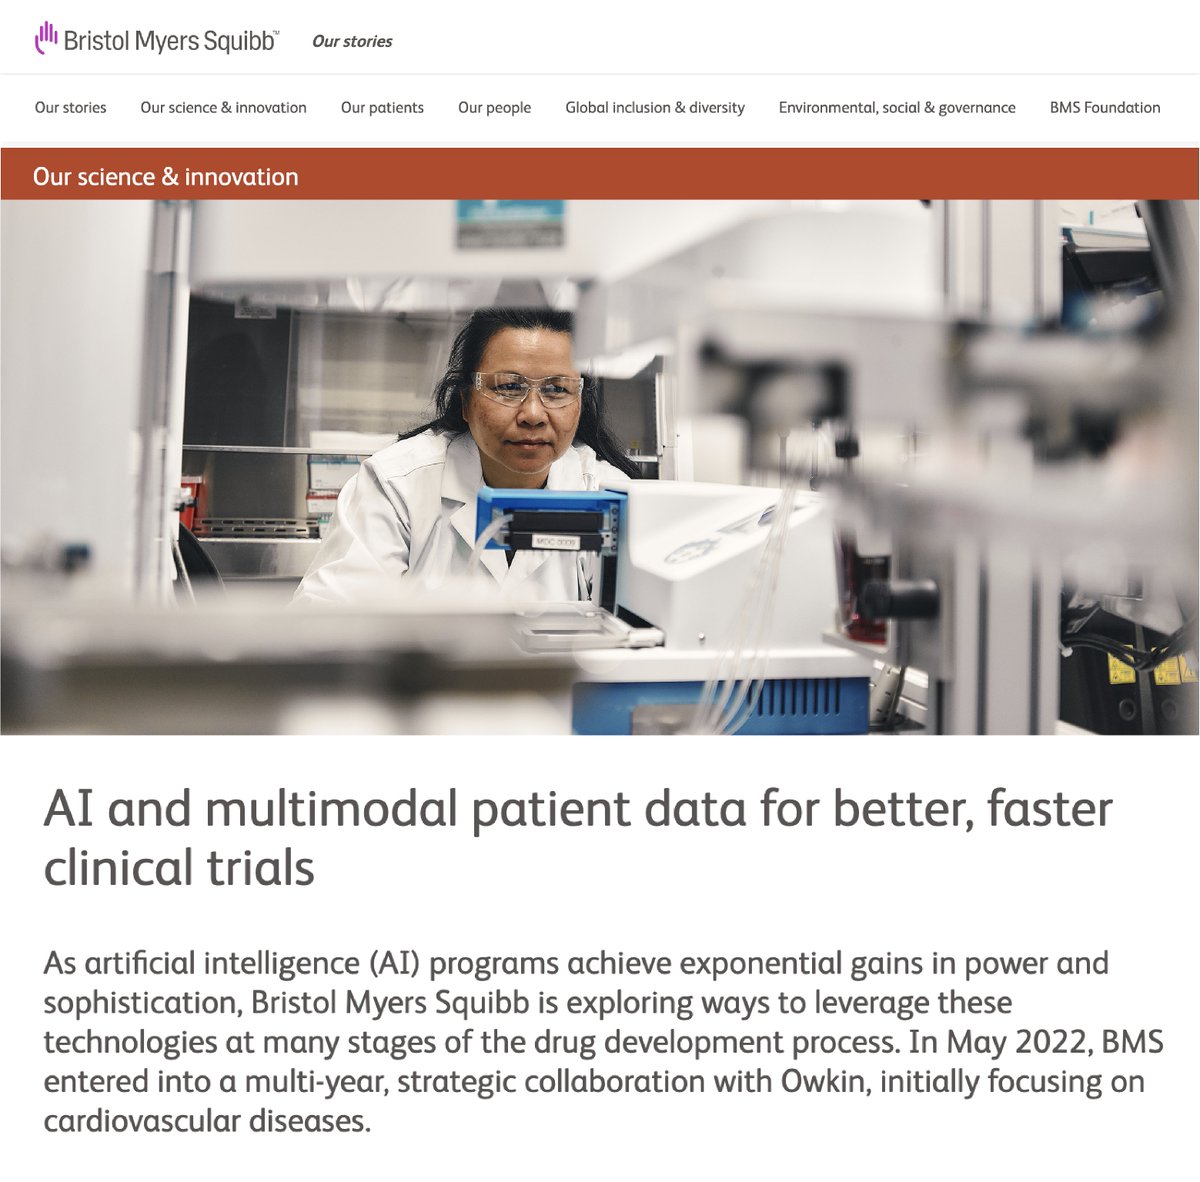 Read this insightful blog from @bmsnews that explains our multi-year strategic collaboration to apply our #AI capabilities to design potentially more precise and efficient #clinicaltrials for BMS’ cardiovascular #drug pipeline. Read the article at bms.com/our-stories/sc…